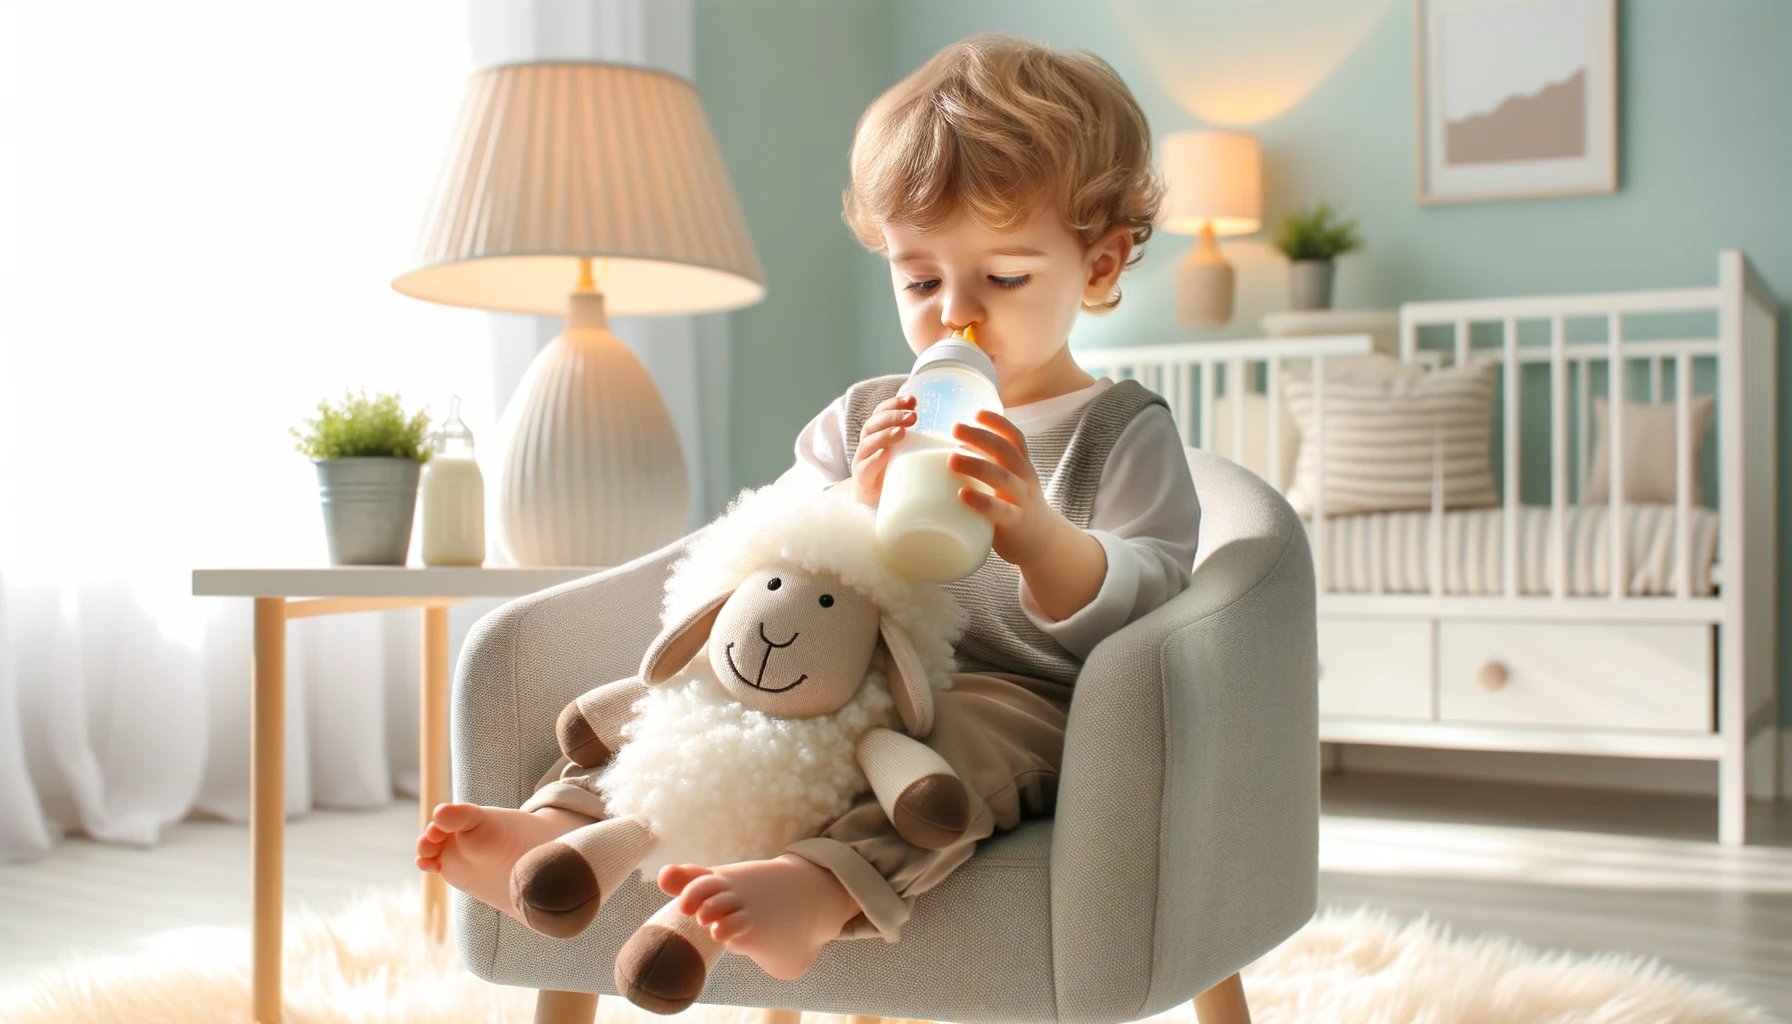 Realistic photo of a baby's room with pastel-colored wallpaper and soft furnishings. A 2-year-old toddler, with curly hair, sits on the floor, drinking from a milk bottle, and beside them is a fluffy sheep puppet.